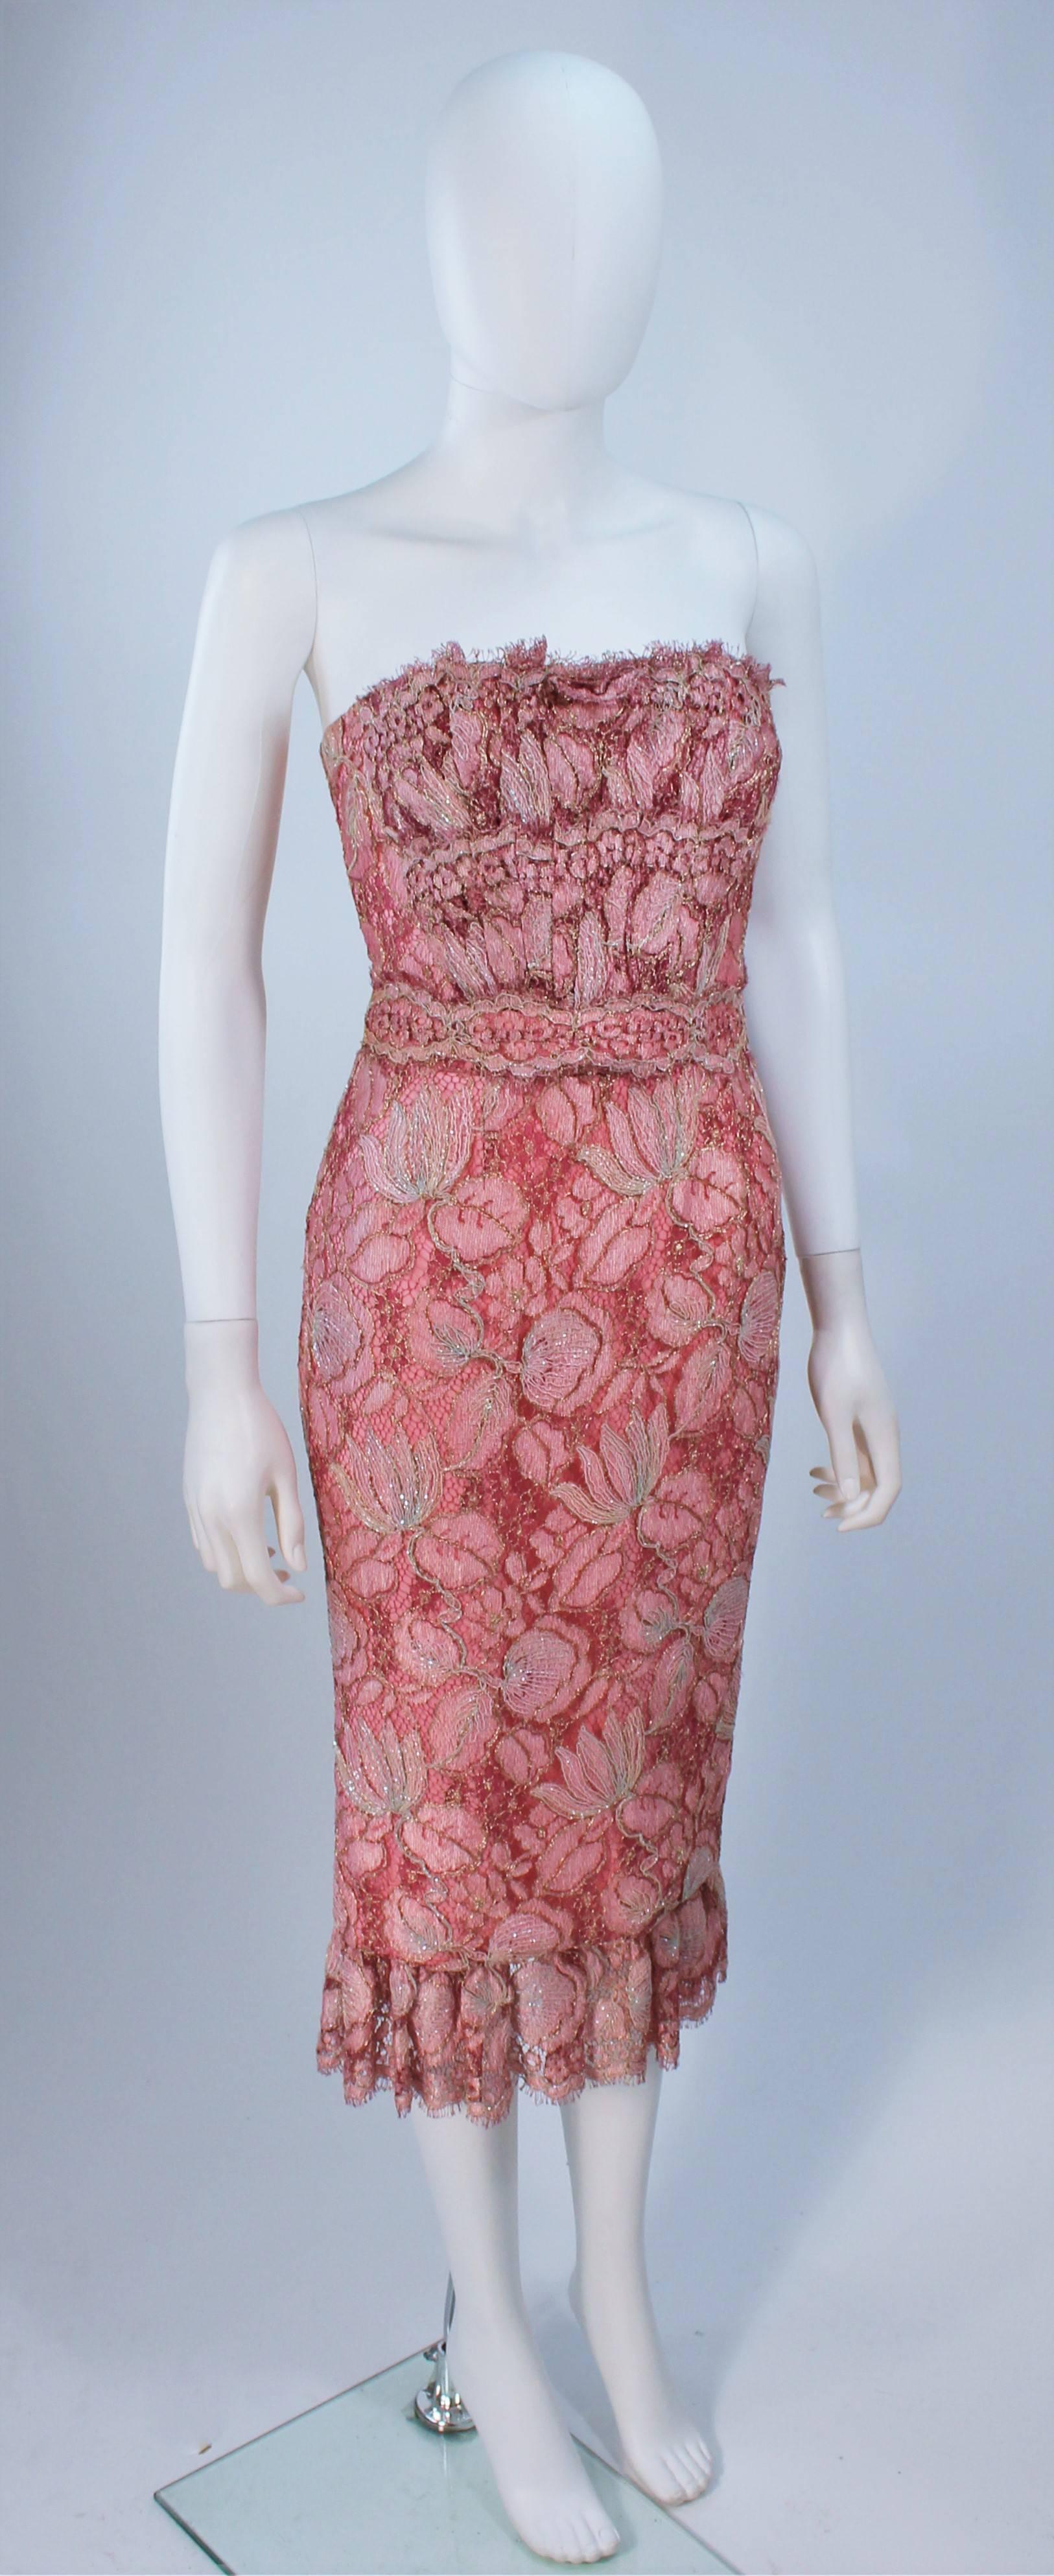 Women's ELIZABETH MASON COUTURE Pink Metallic Lace Cocktail Dress Made to Order For Sale